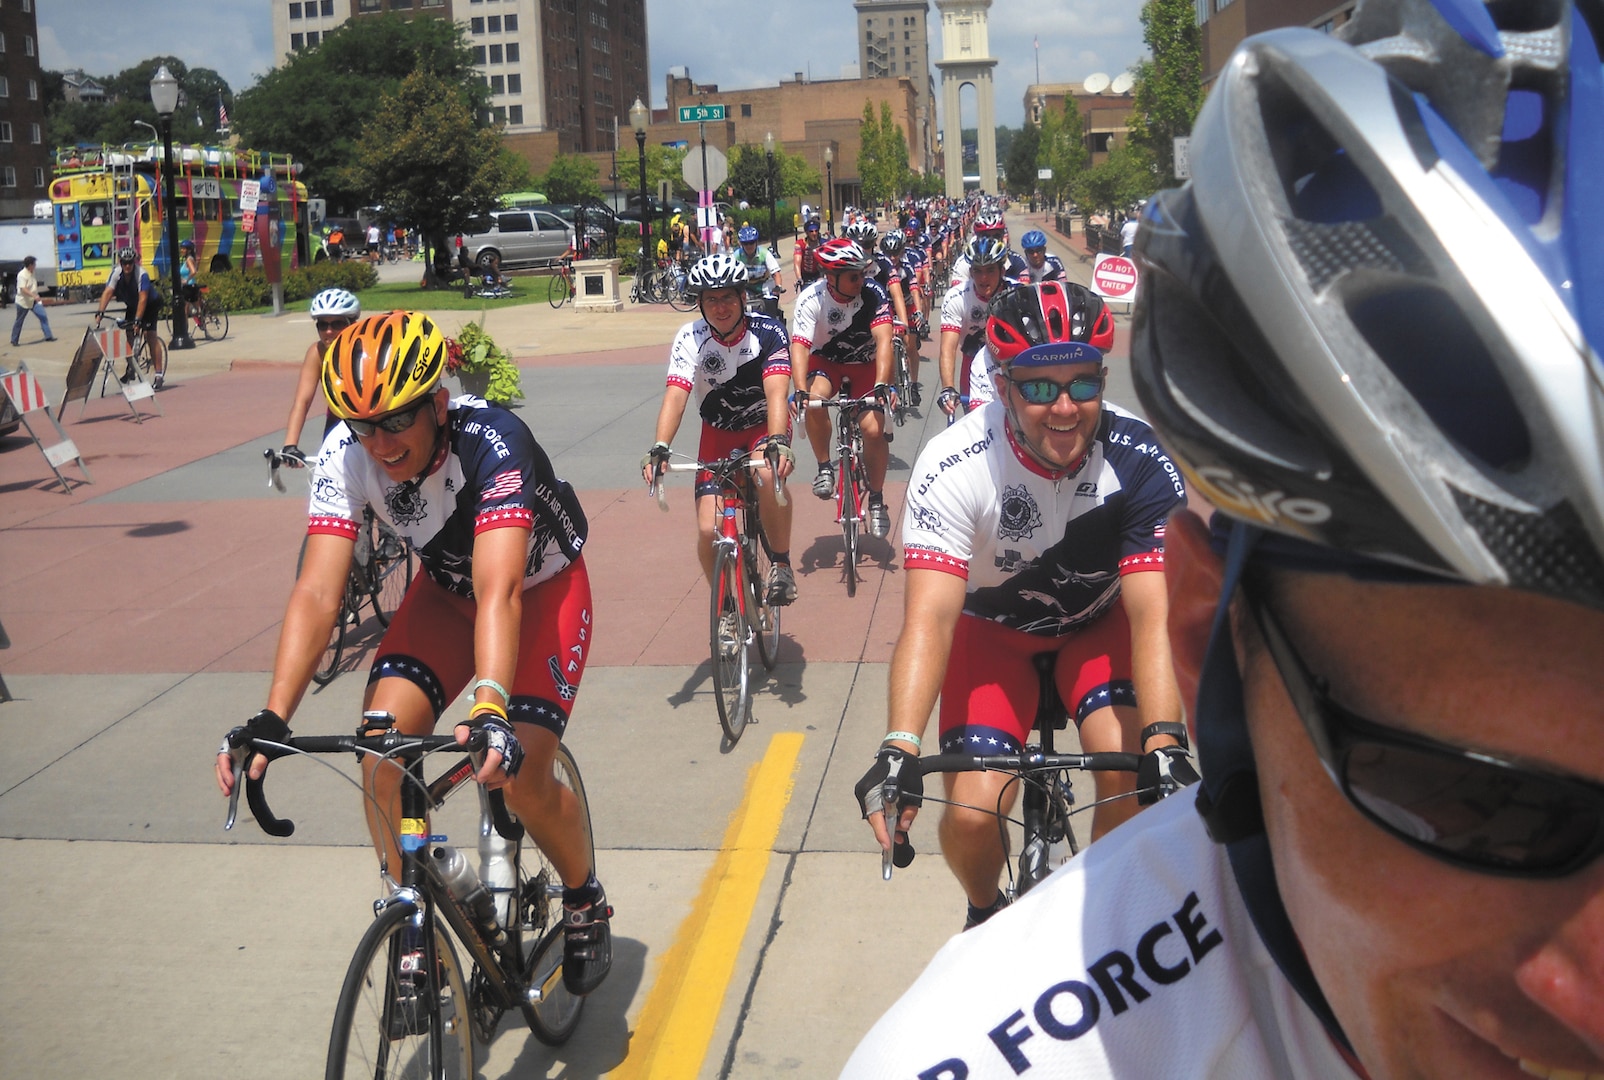 The pack of Texas' members of the Air Force Cycling team ride two-by-two into Dubuque, Iowa - the last stop at the Register's Annual Great Bicycle Ride Across Iowa, on July 31. (U.S. Air Force photo/Daniel Lunsford)